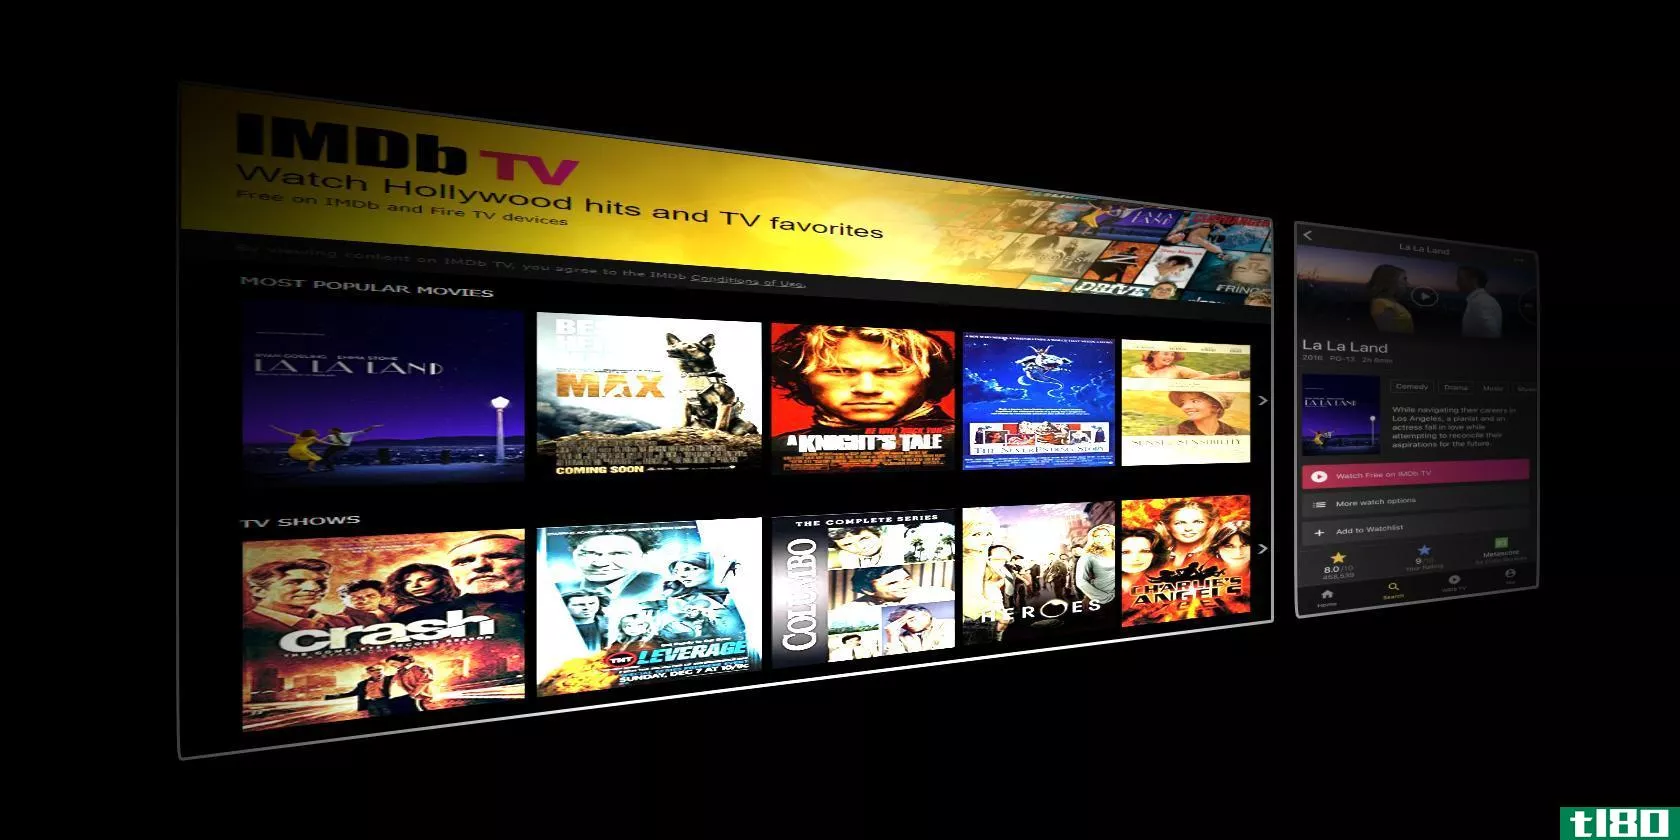 An illustration showing the Amazon iMDB TV interface in perspective view, set against a black background